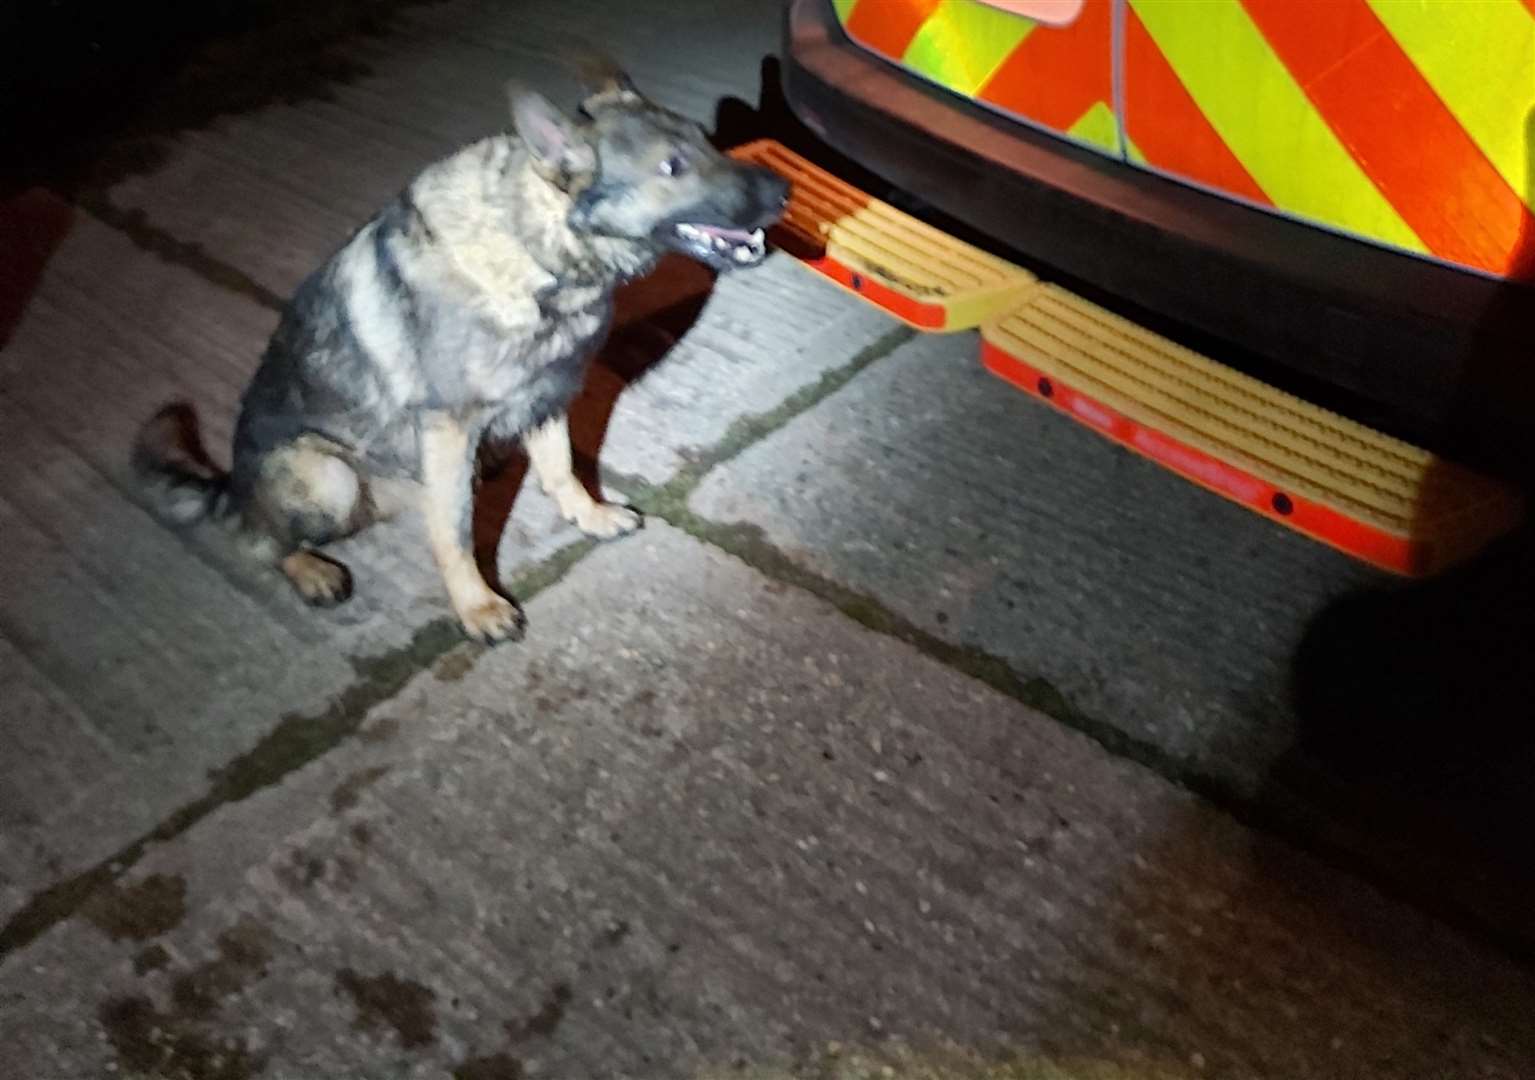 A police dog helped to track down a man who failed to stop for police